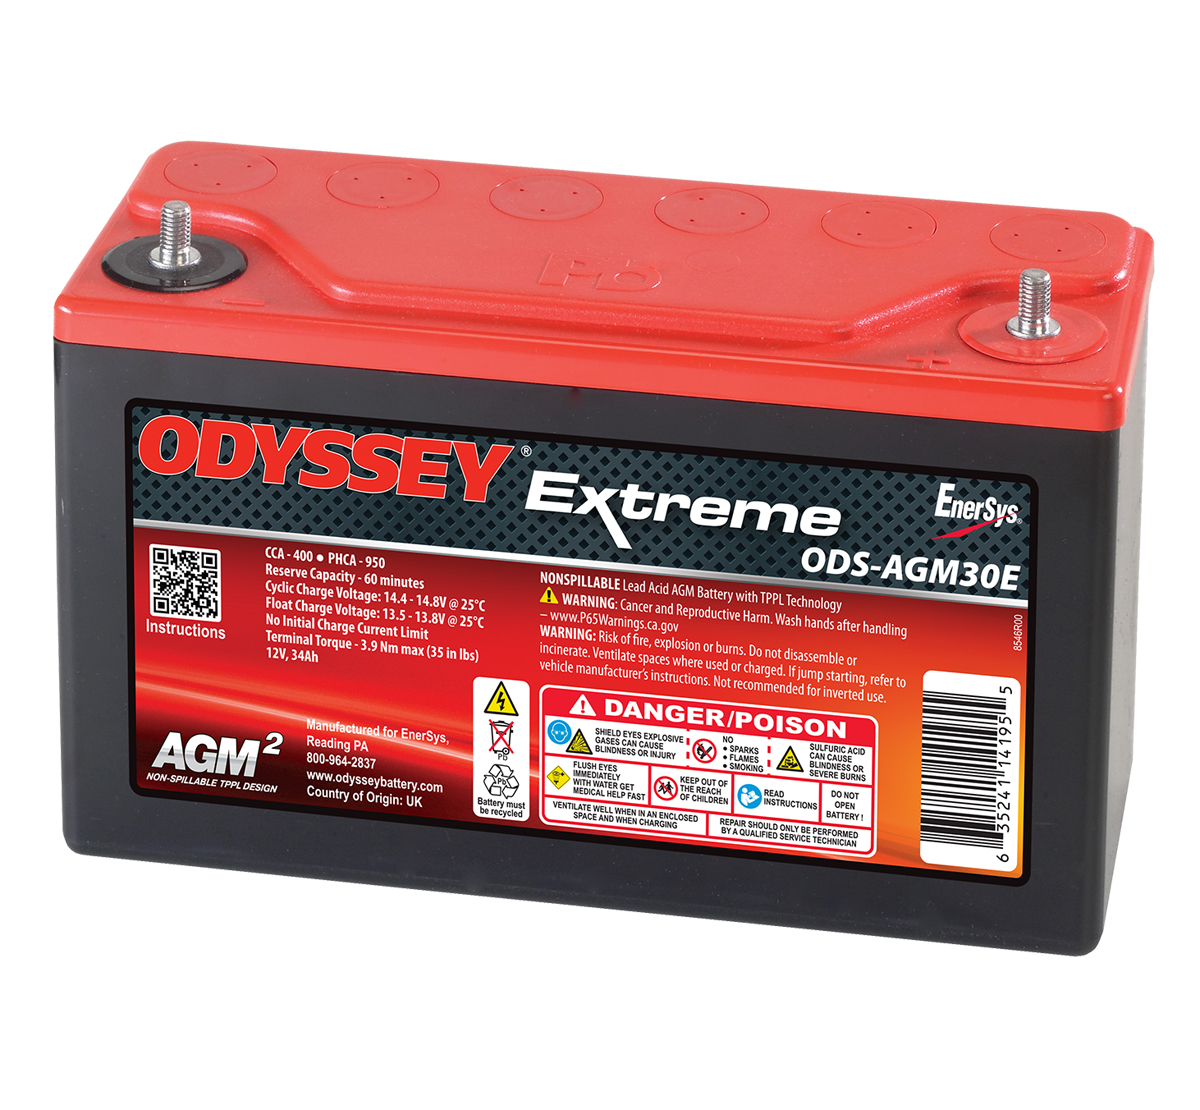 Odyssey ODS-AGM30E PC950 Extreme Racing 30 Battery